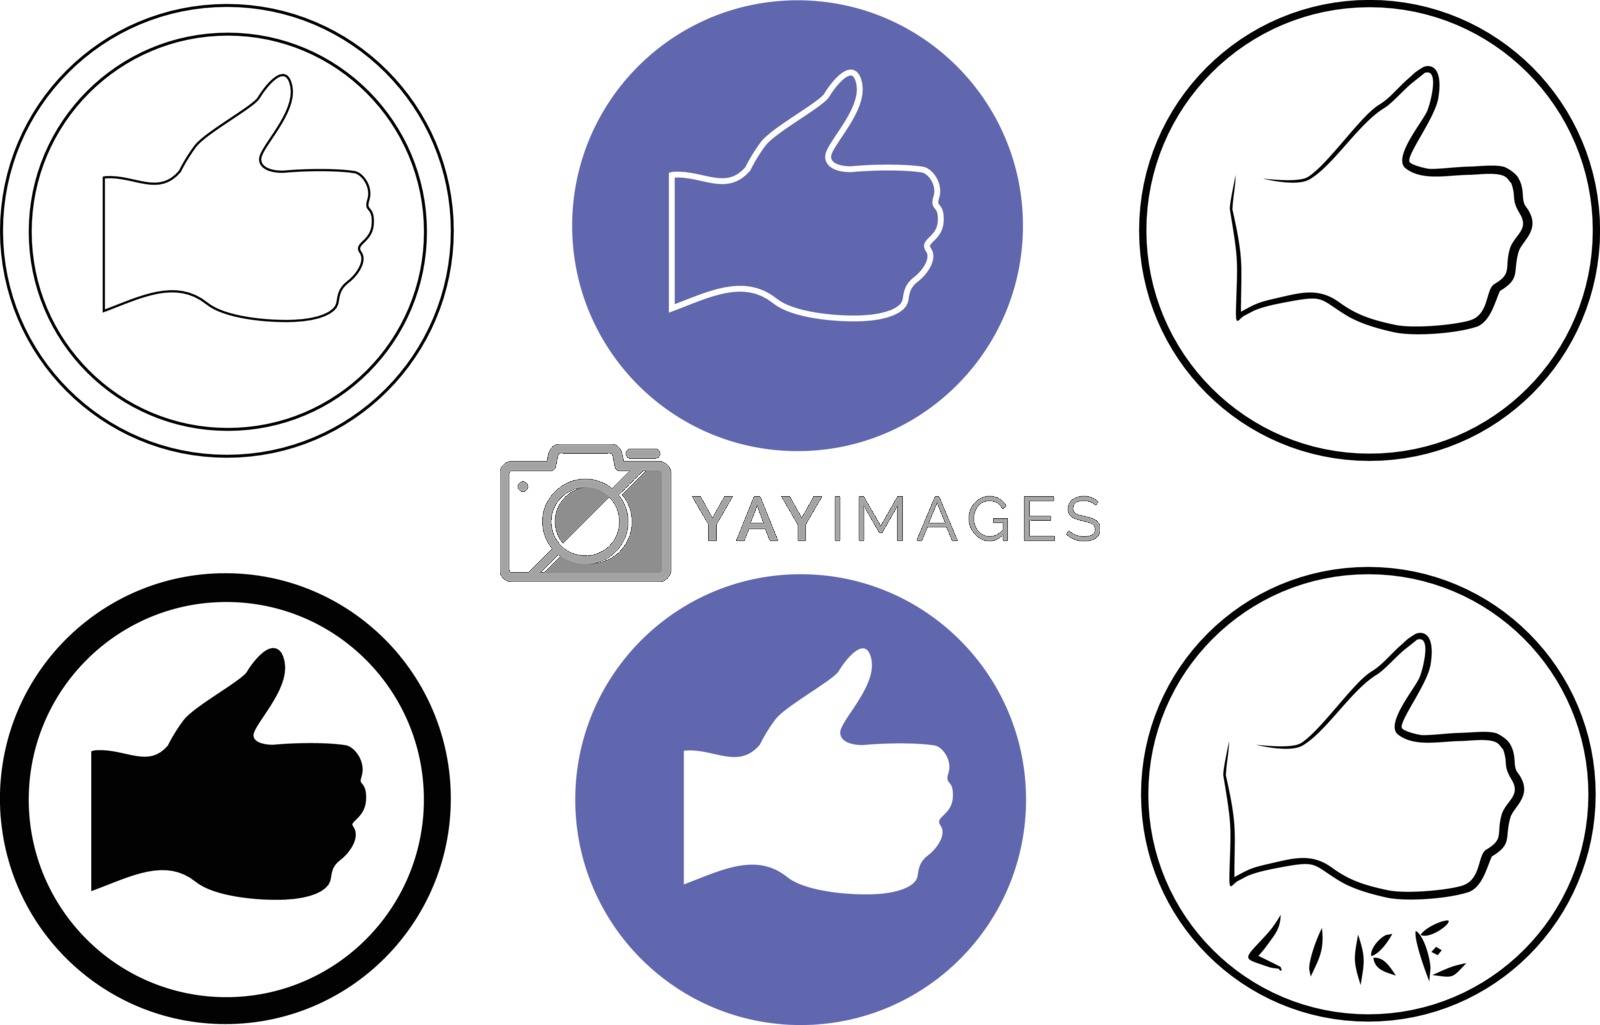 Royalty free image of Thumbs Up Sign set icon vector eps 10 by leonardo255